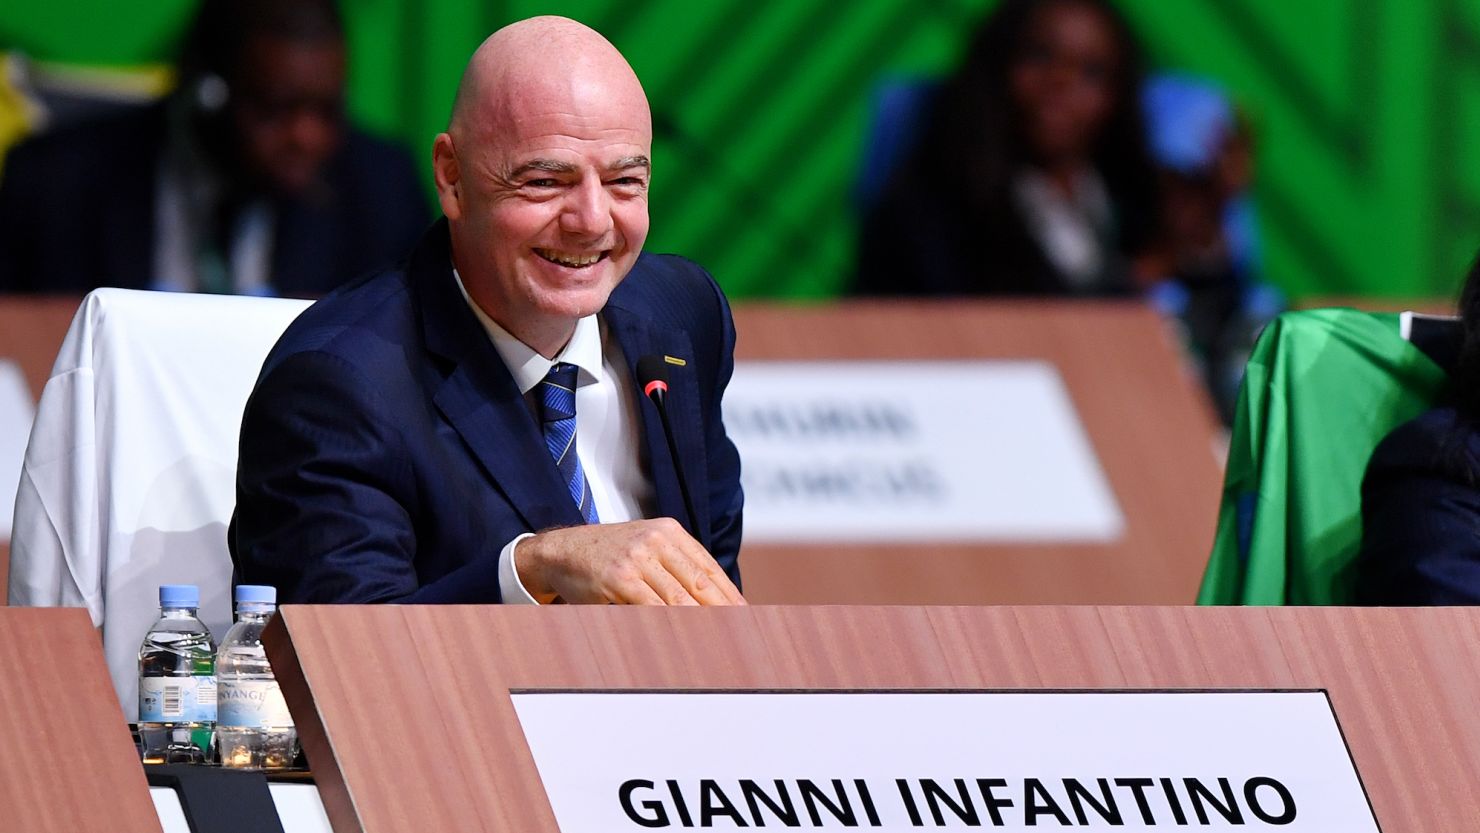 Gianni Infantino succeeded the disgraced Sepp Blatter in 2016.